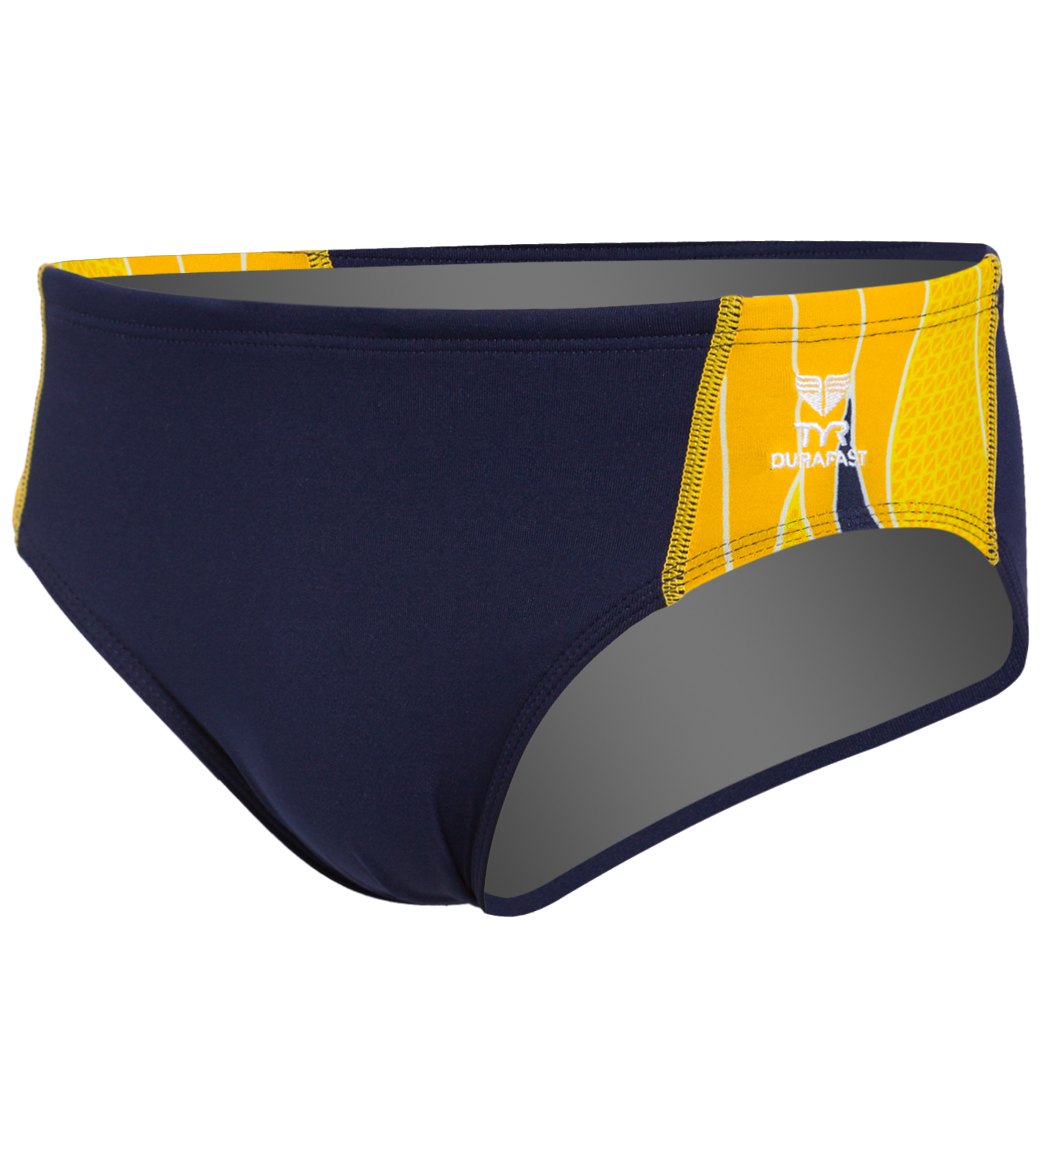 TYR Phoenix Splice Racer Brief Swimsuit - Navy/Gold 28 Polyester/Spandex - Swimoutlet.com